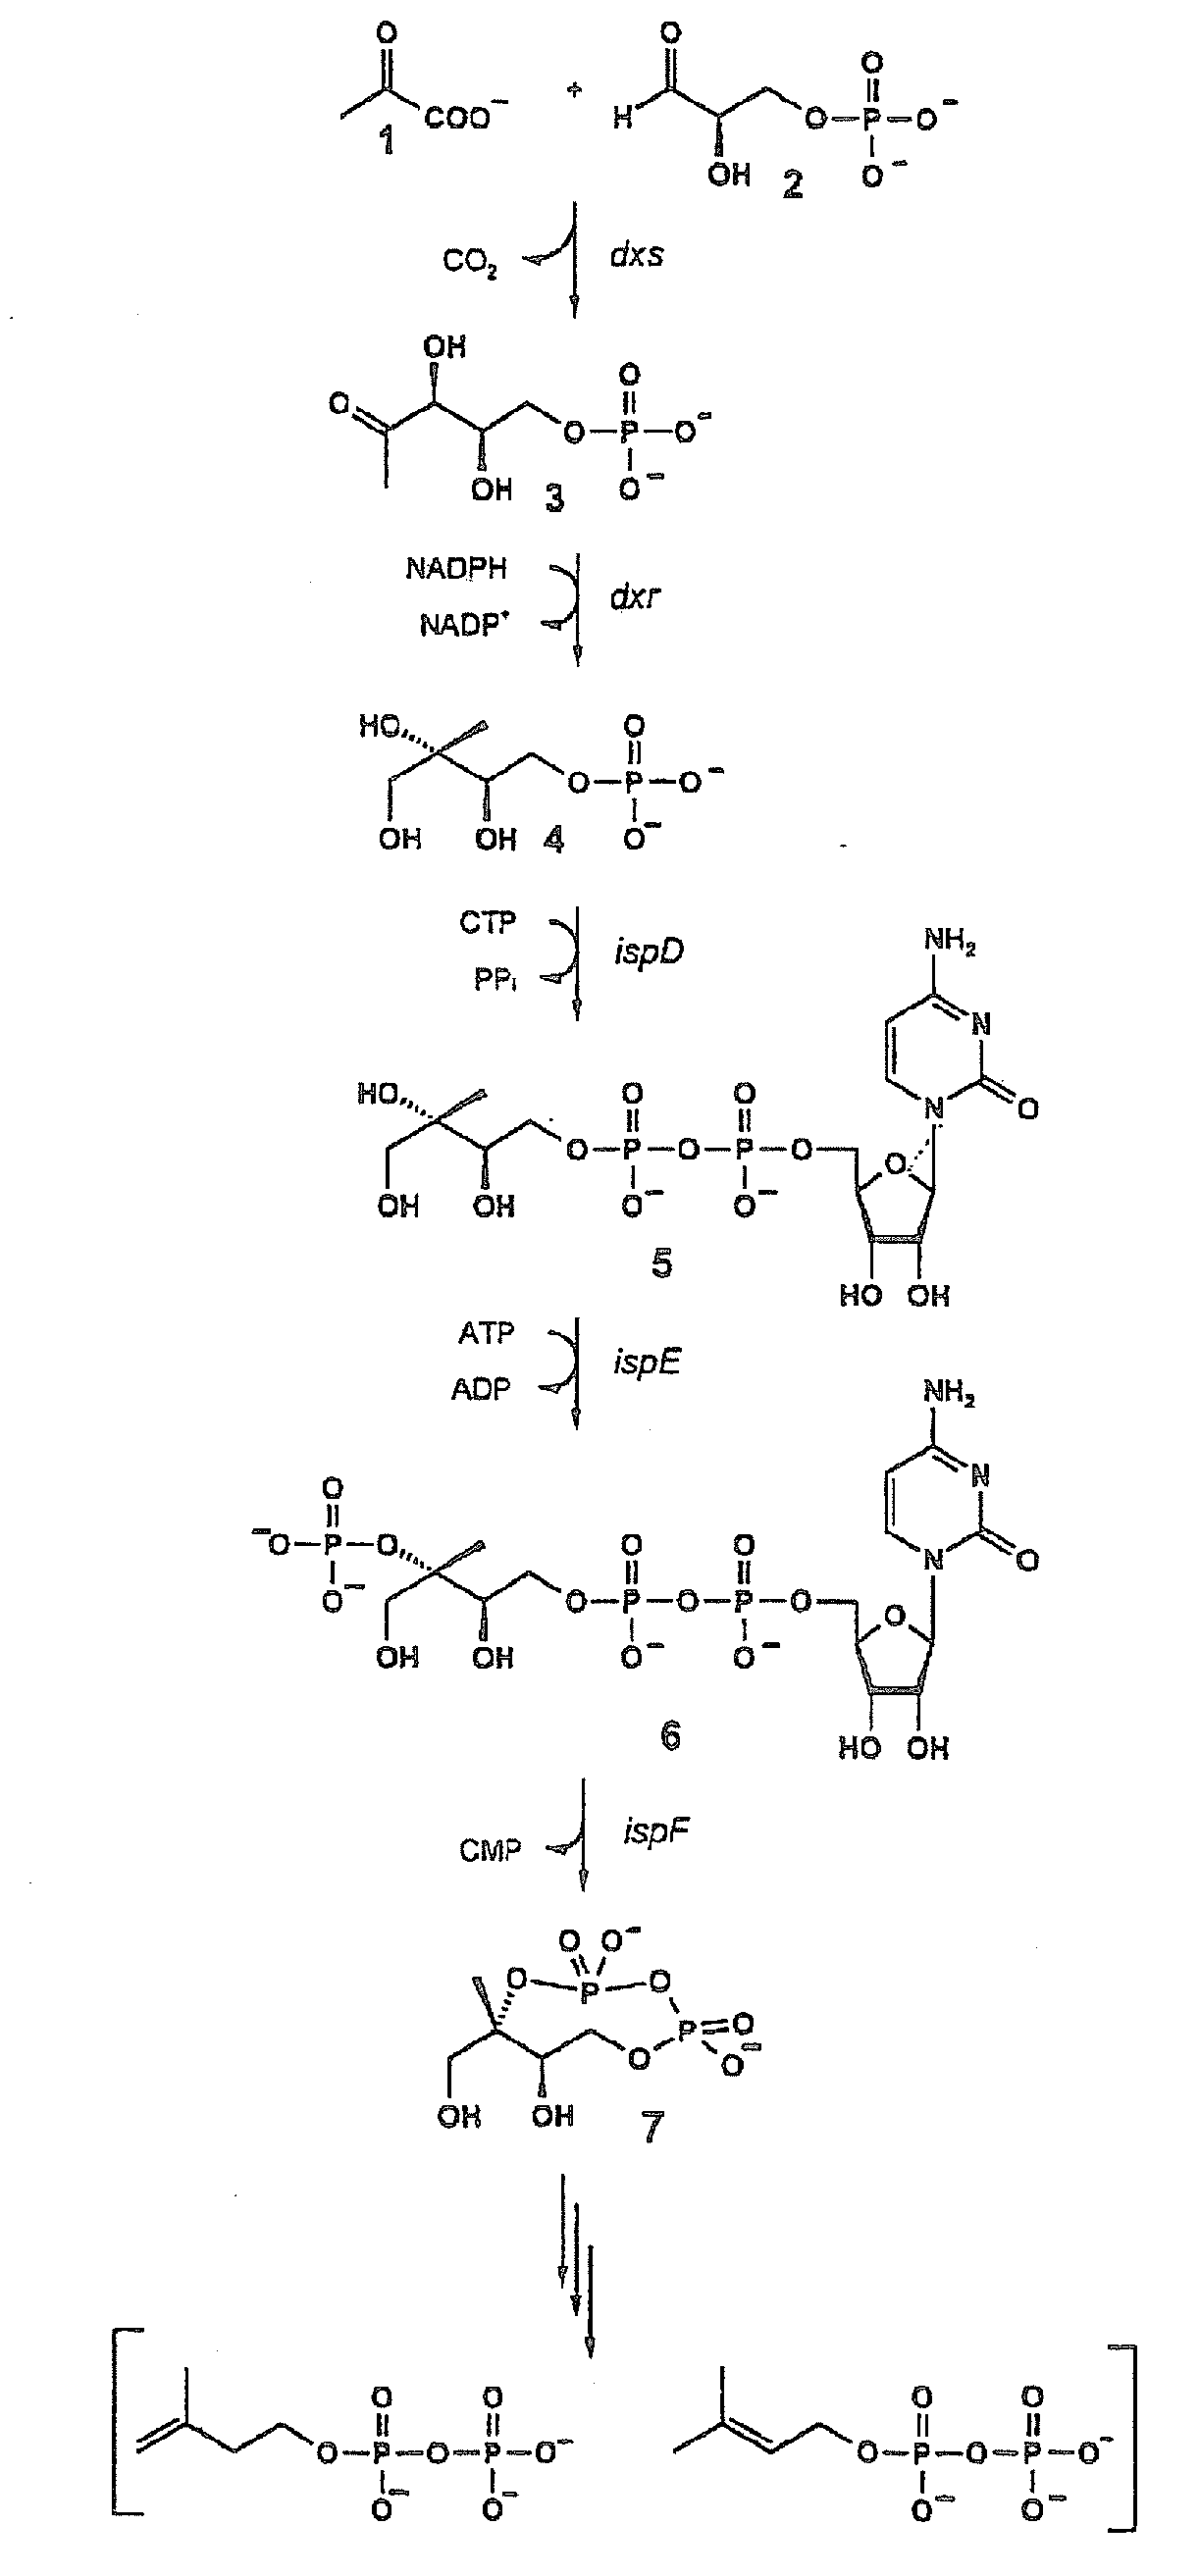 Intermediates and enzymes of the non-mevalonate isoprenoid pathway